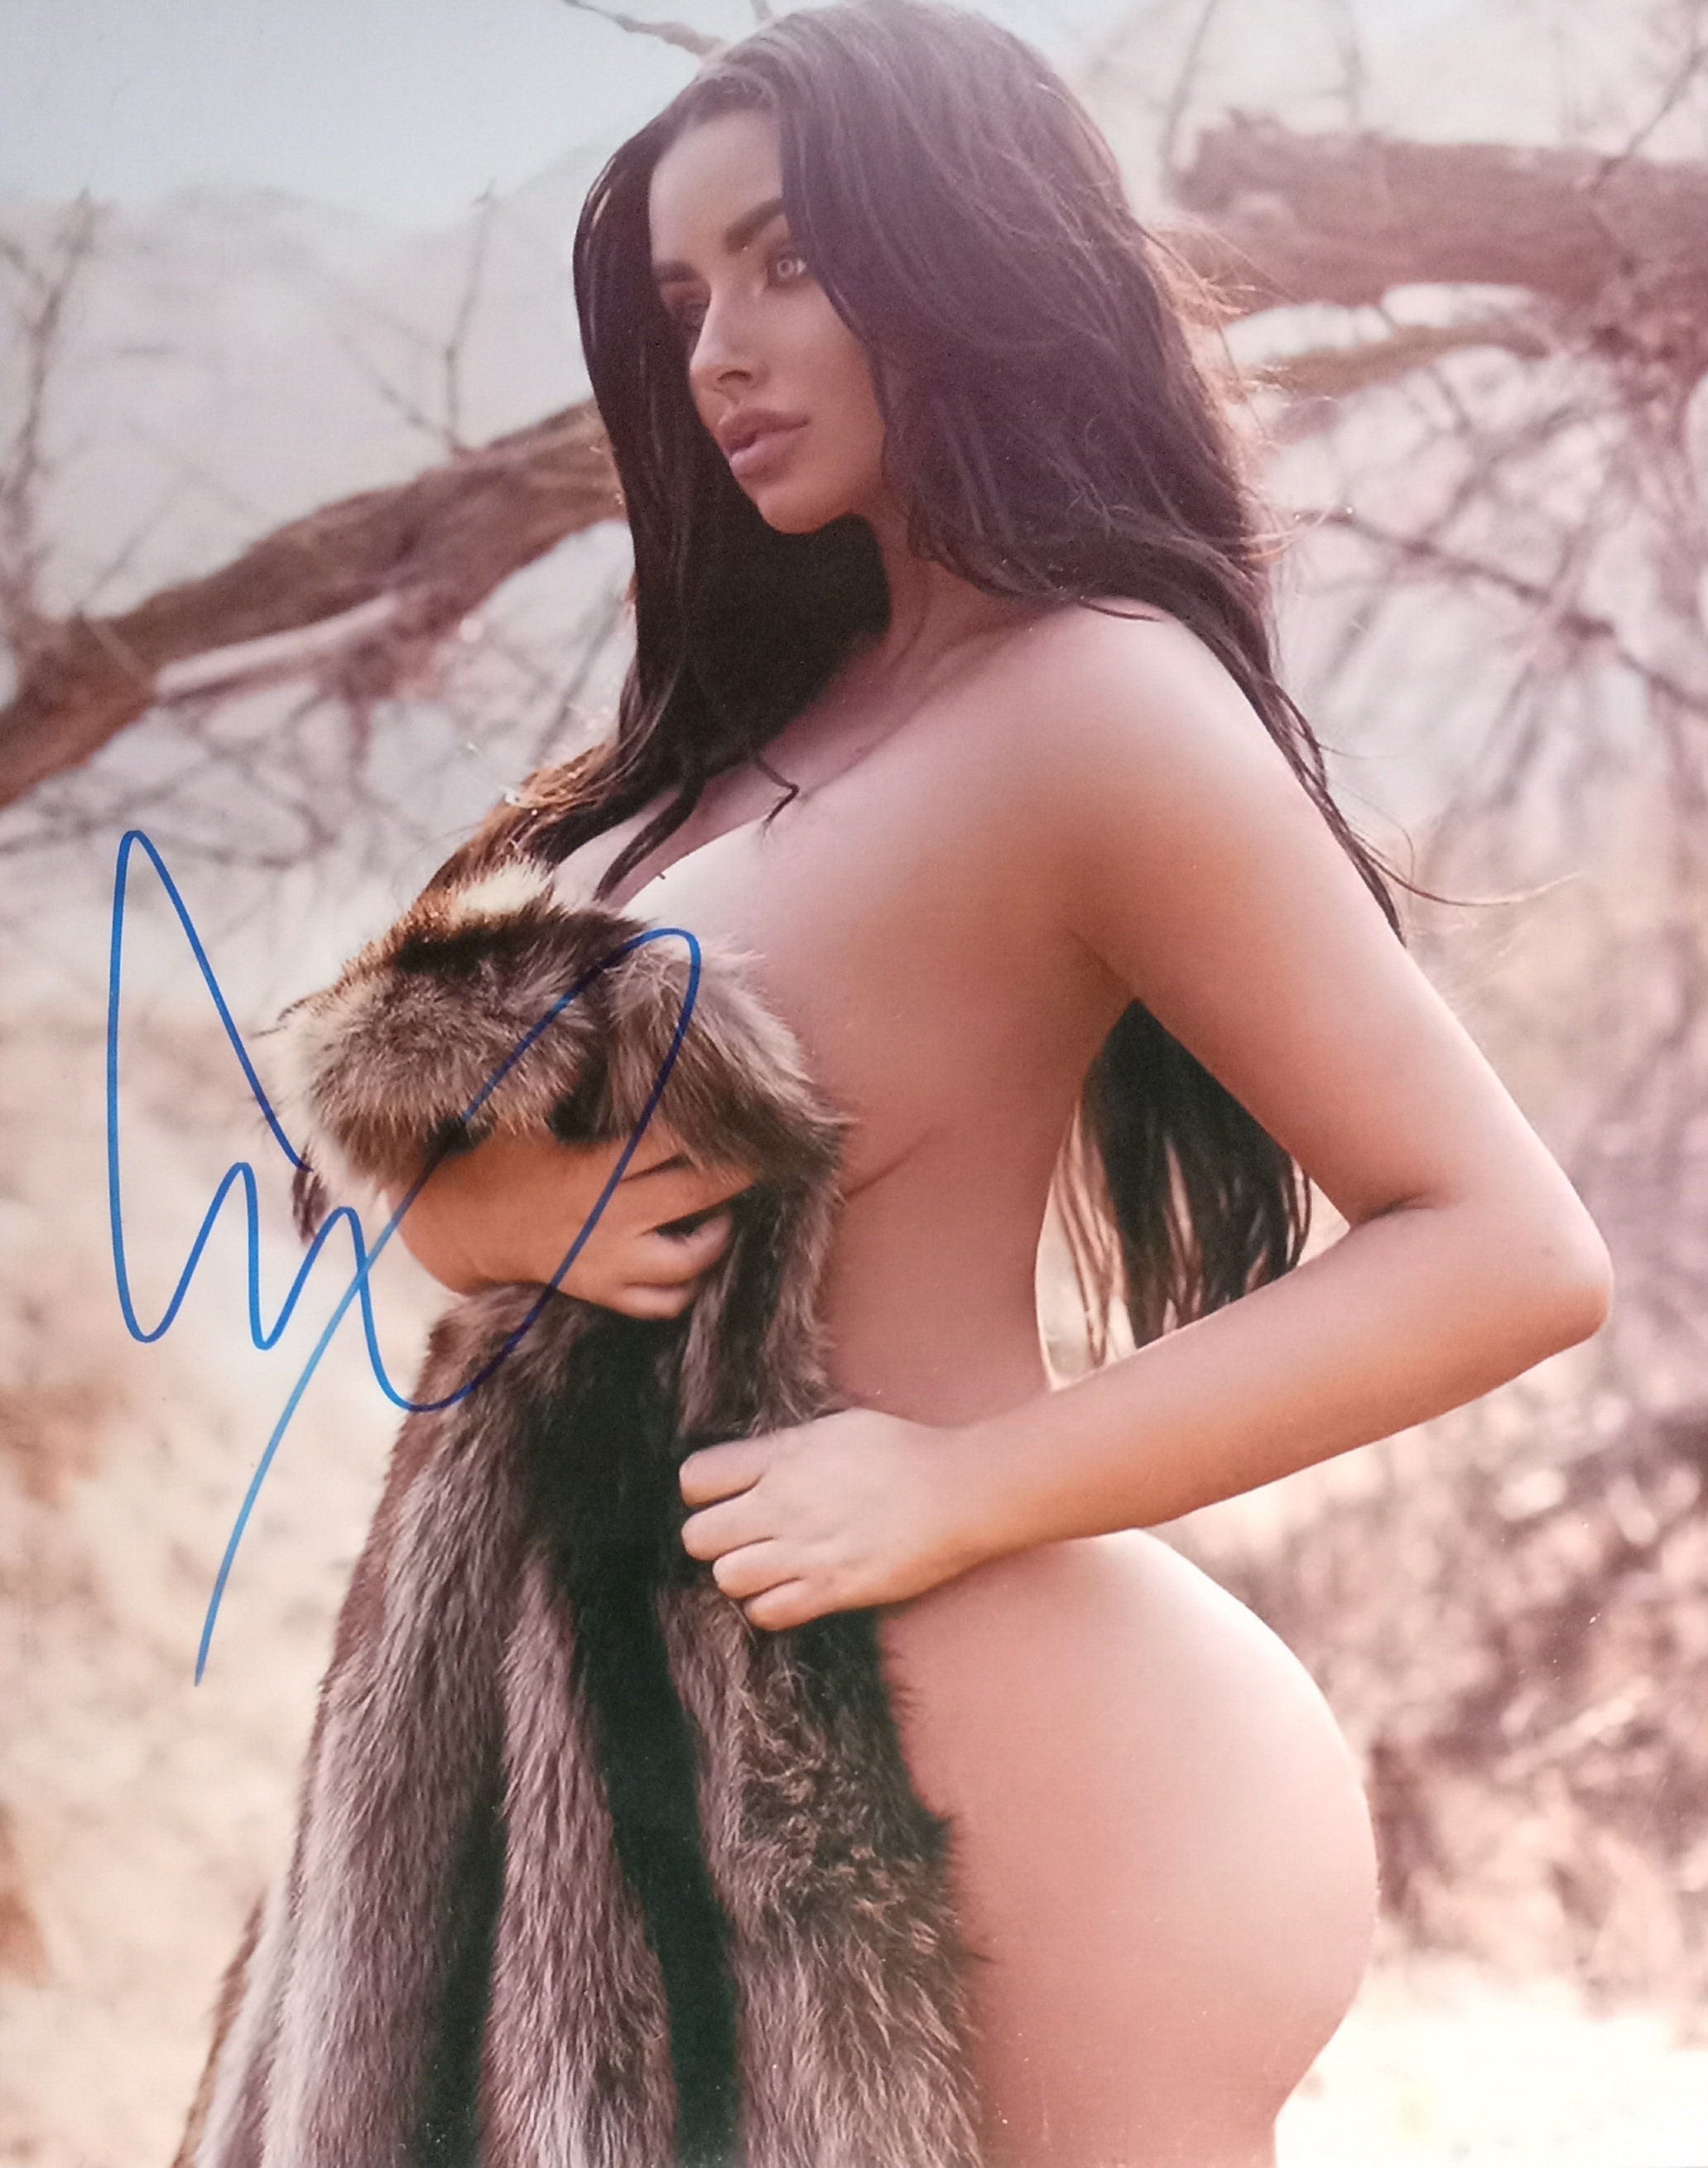 ching yin lee share abigail ratchford porn photos